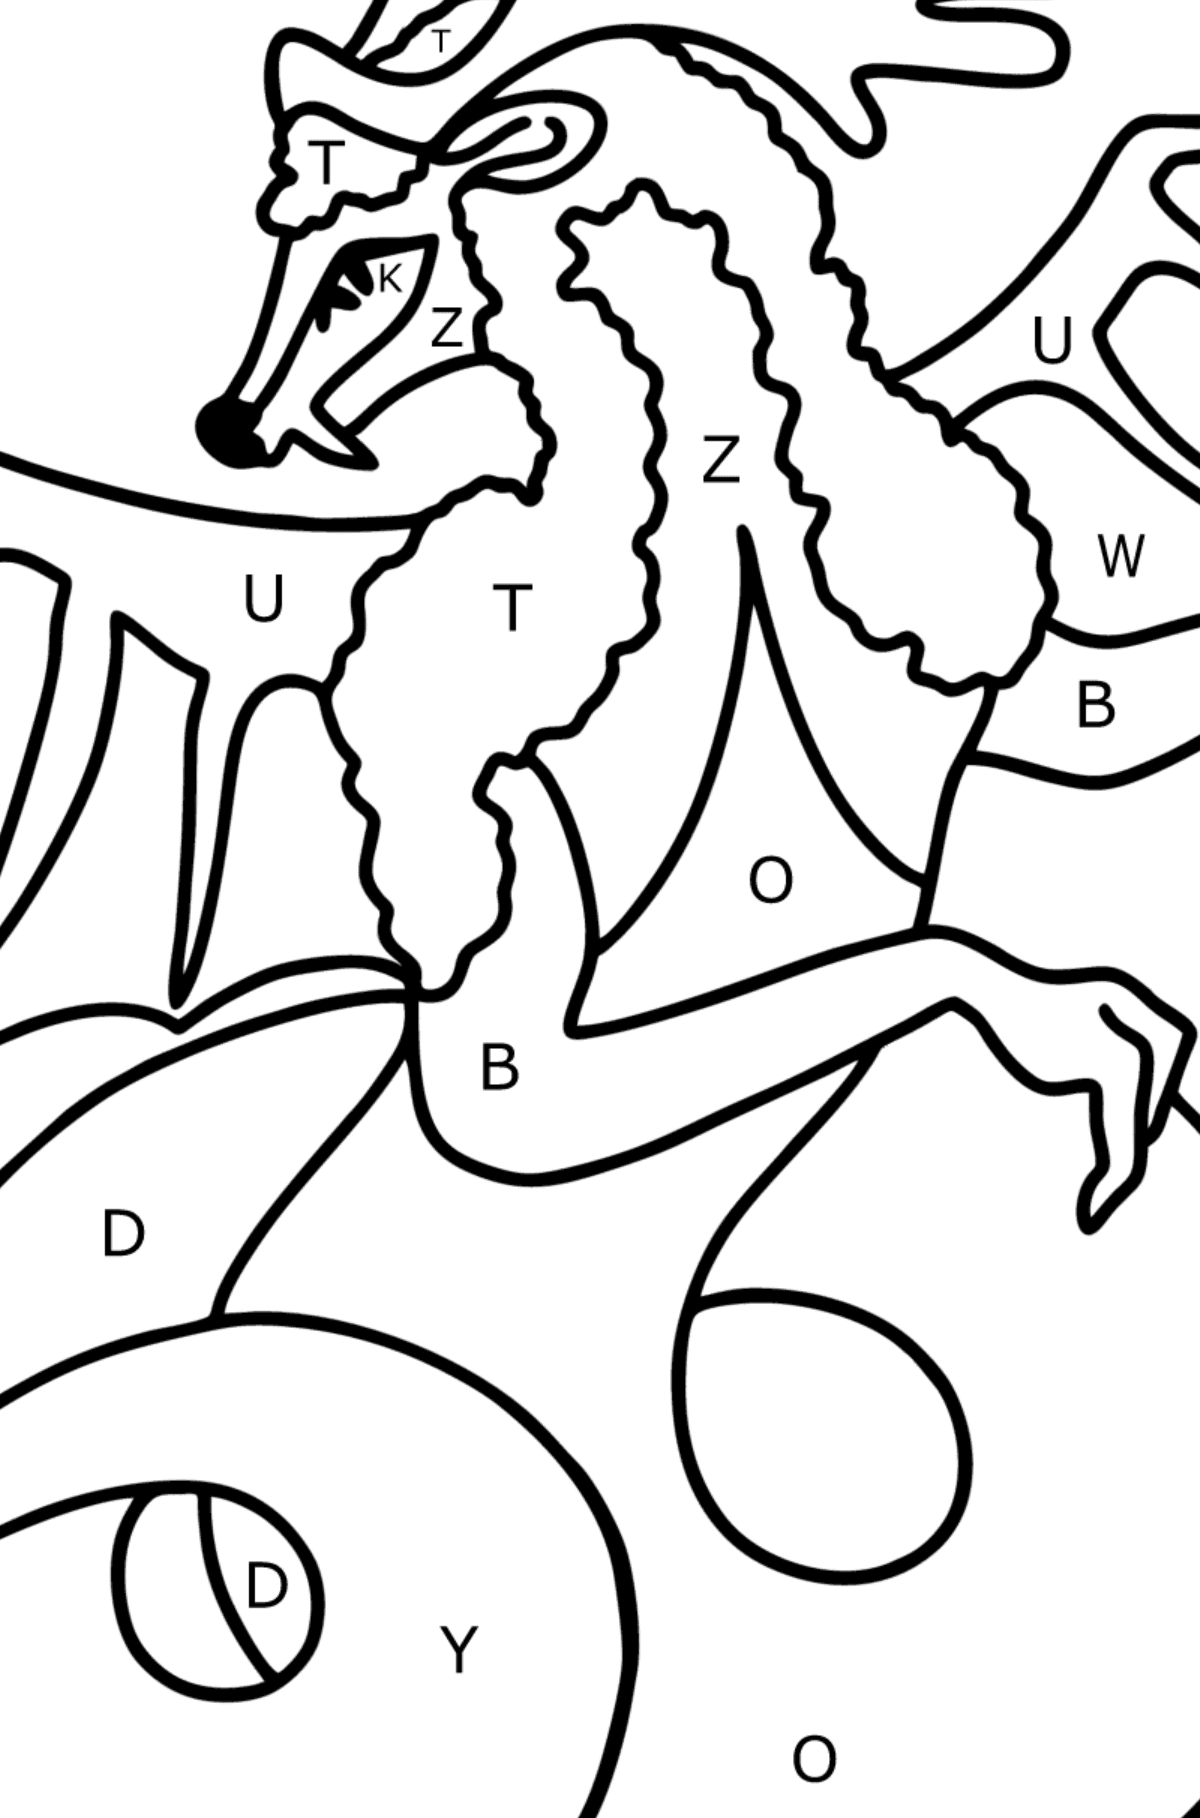 Beautiful Dragon coloring page - Coloring by Letters for Kids